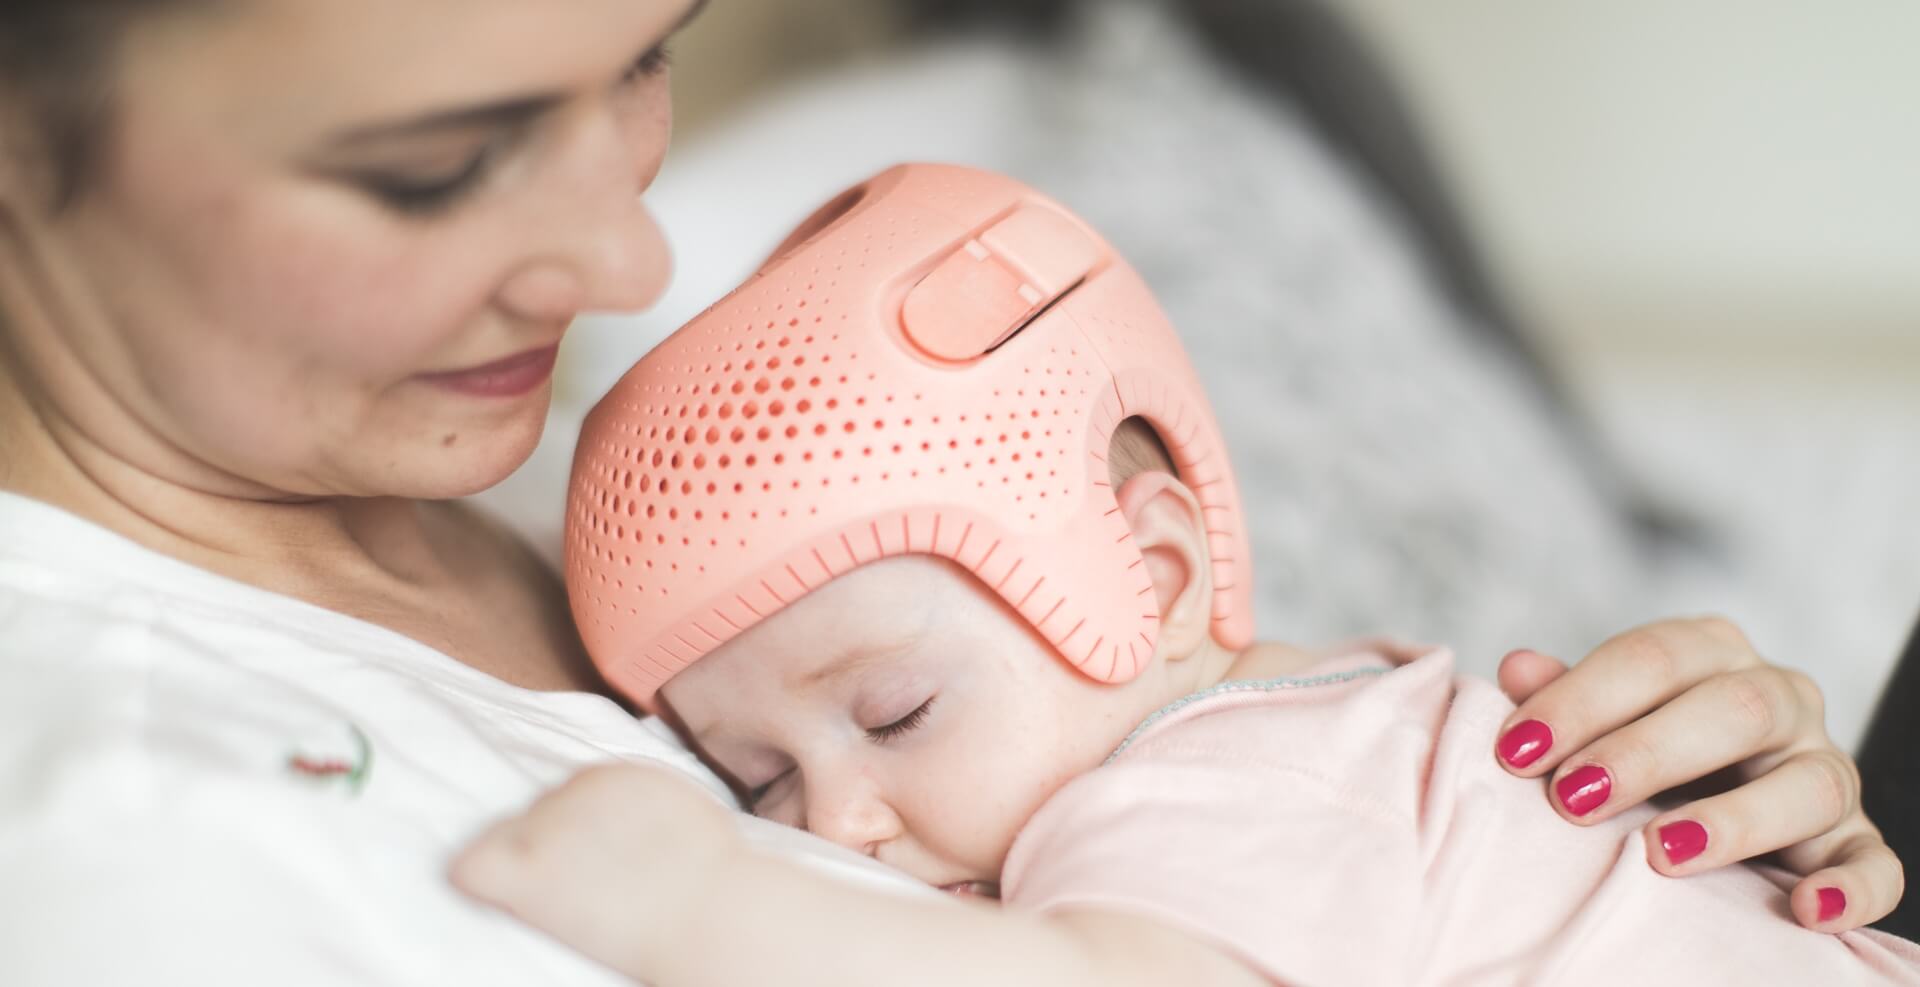 Plagiocephaly: How to Recognise Plagiocephaly in Babies